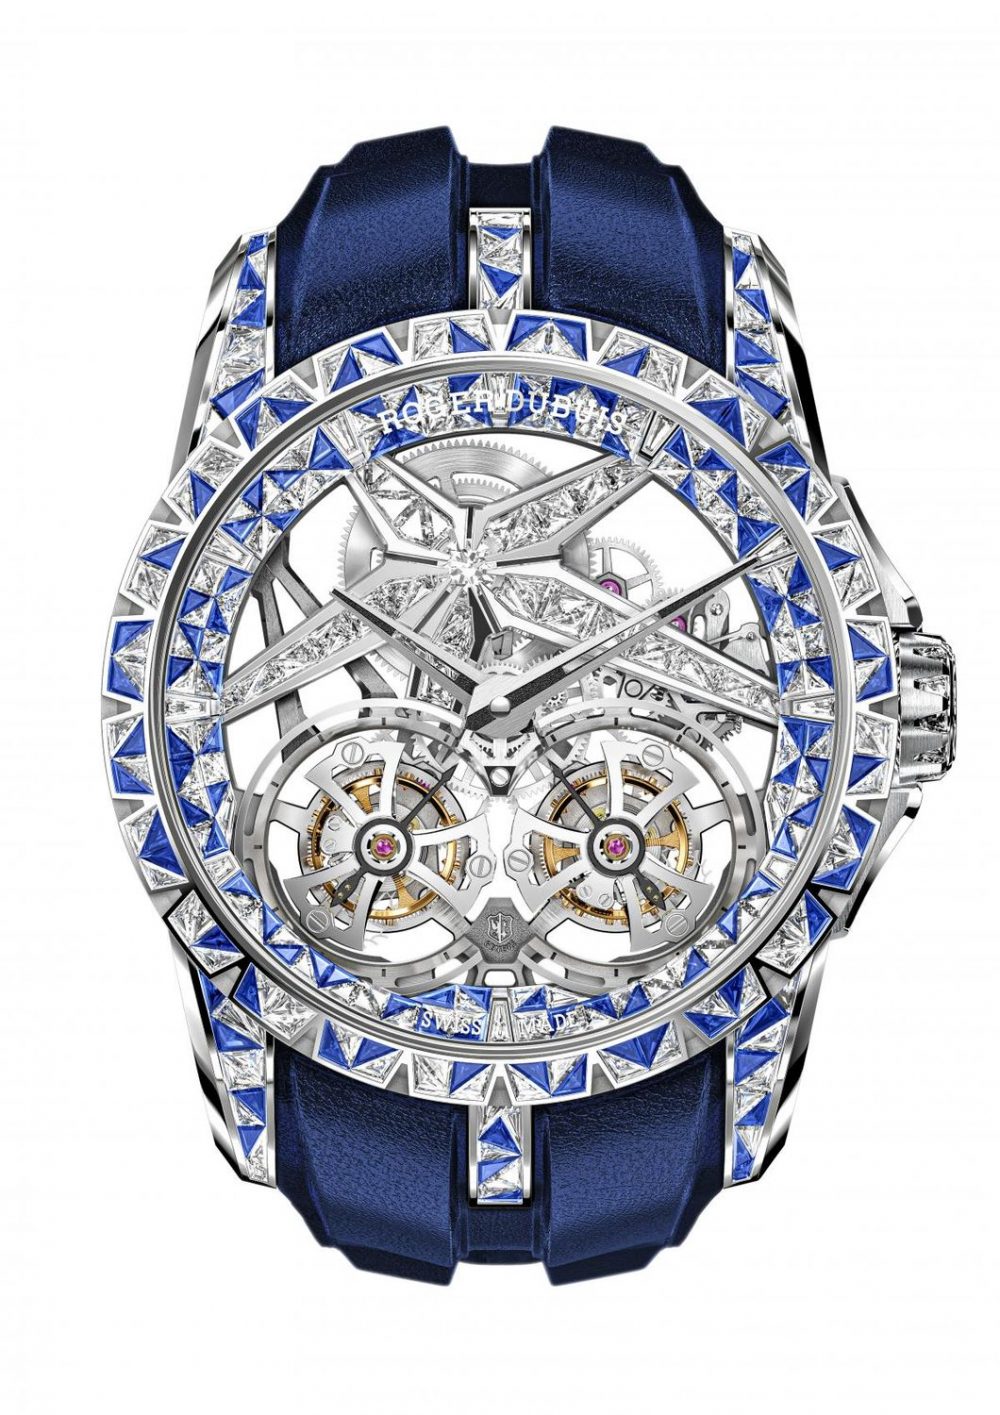 Roger Dubuis Excalibur Superbia features two flying tourbillon in a manufacture skeleton calibre